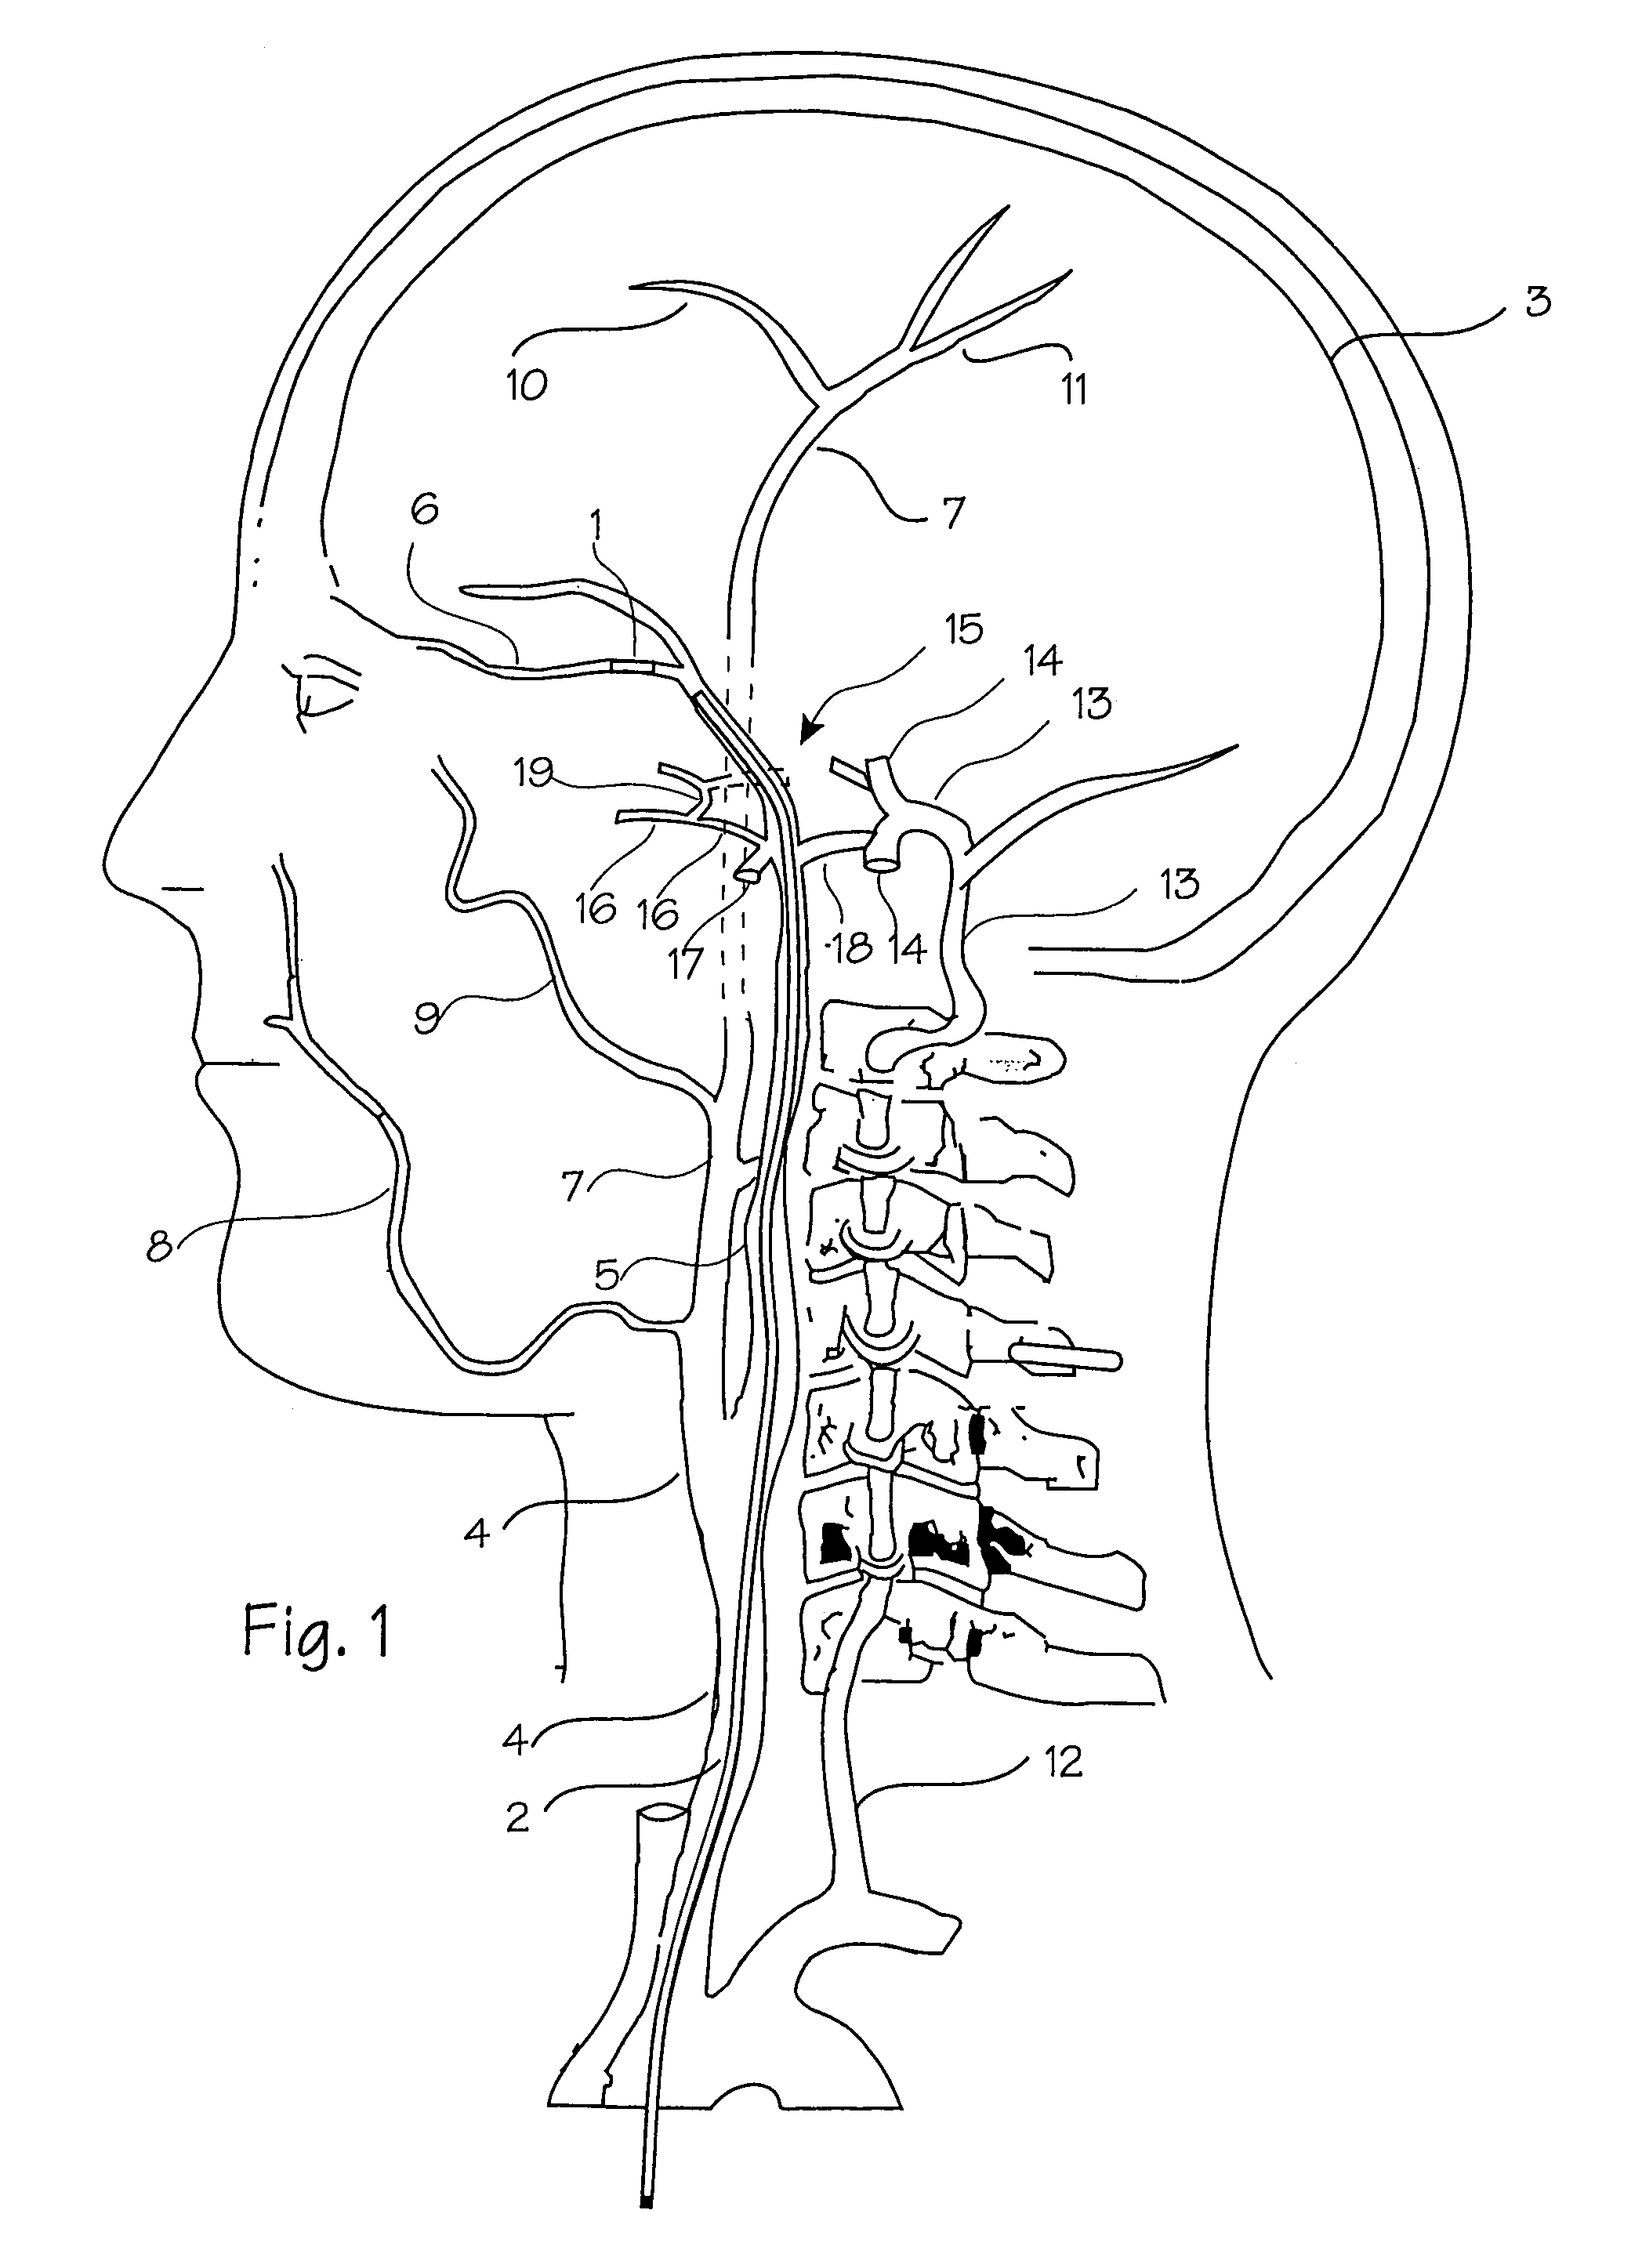 Intracranial stent and method of use